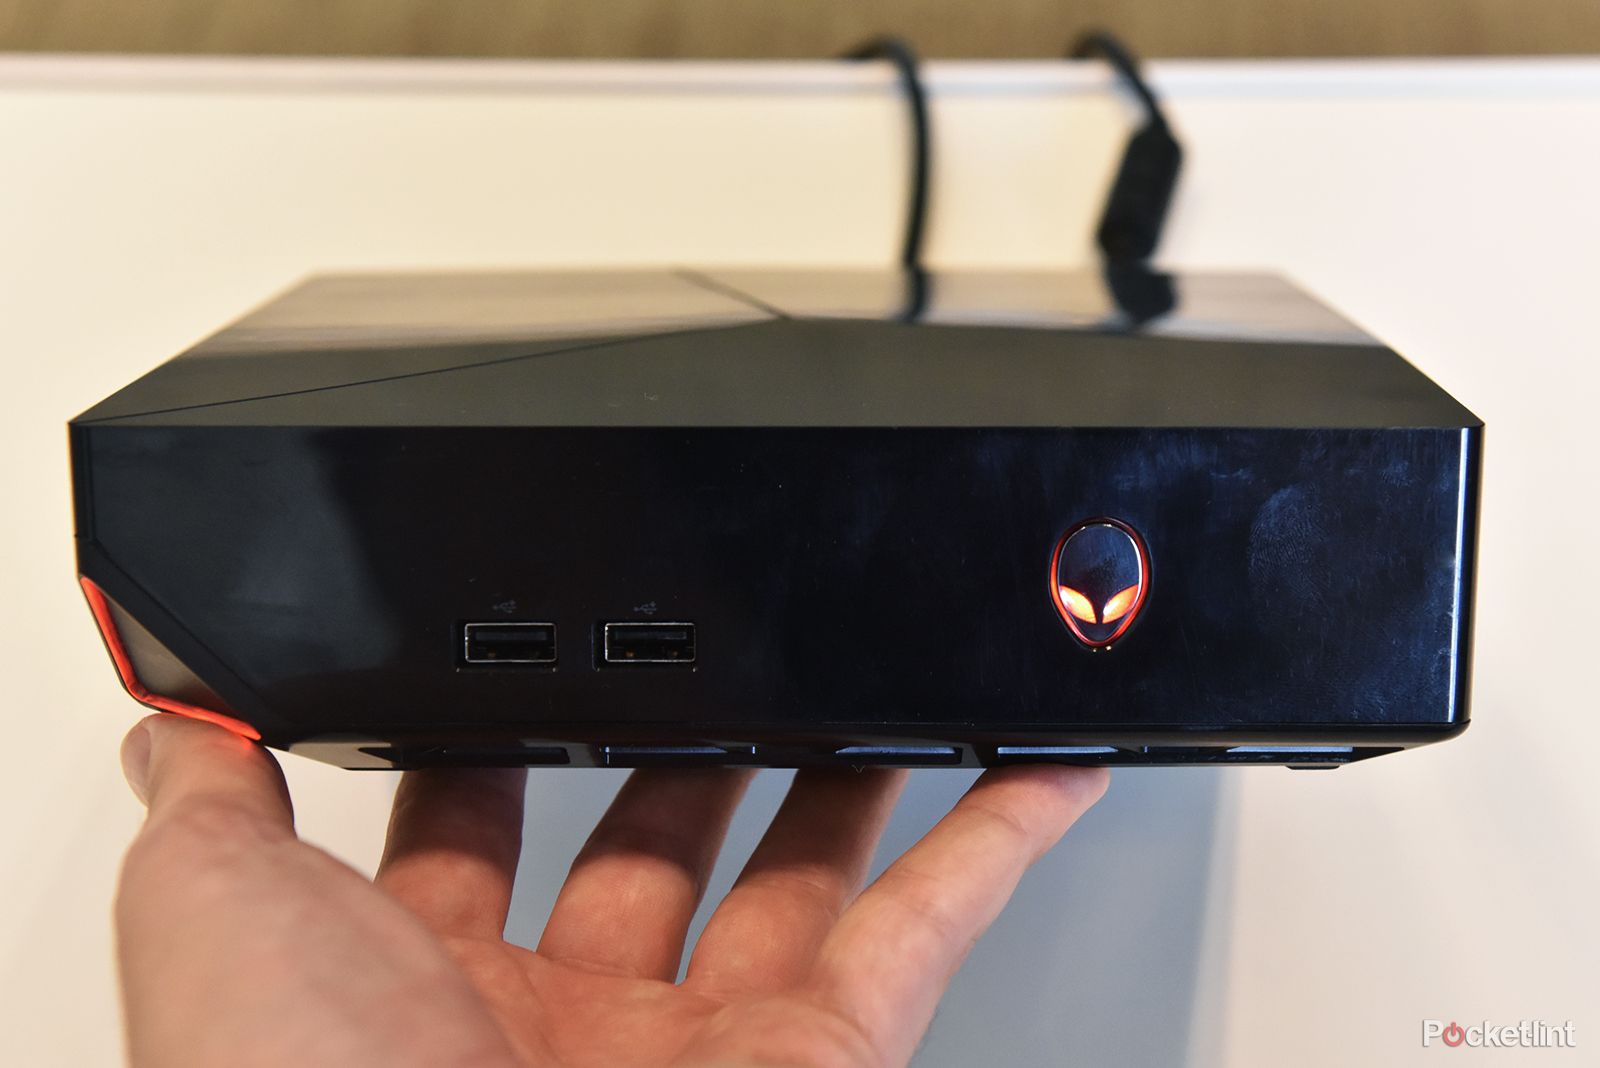 could alienware s steam machine blow ps4 and xbox one out of the water image 2